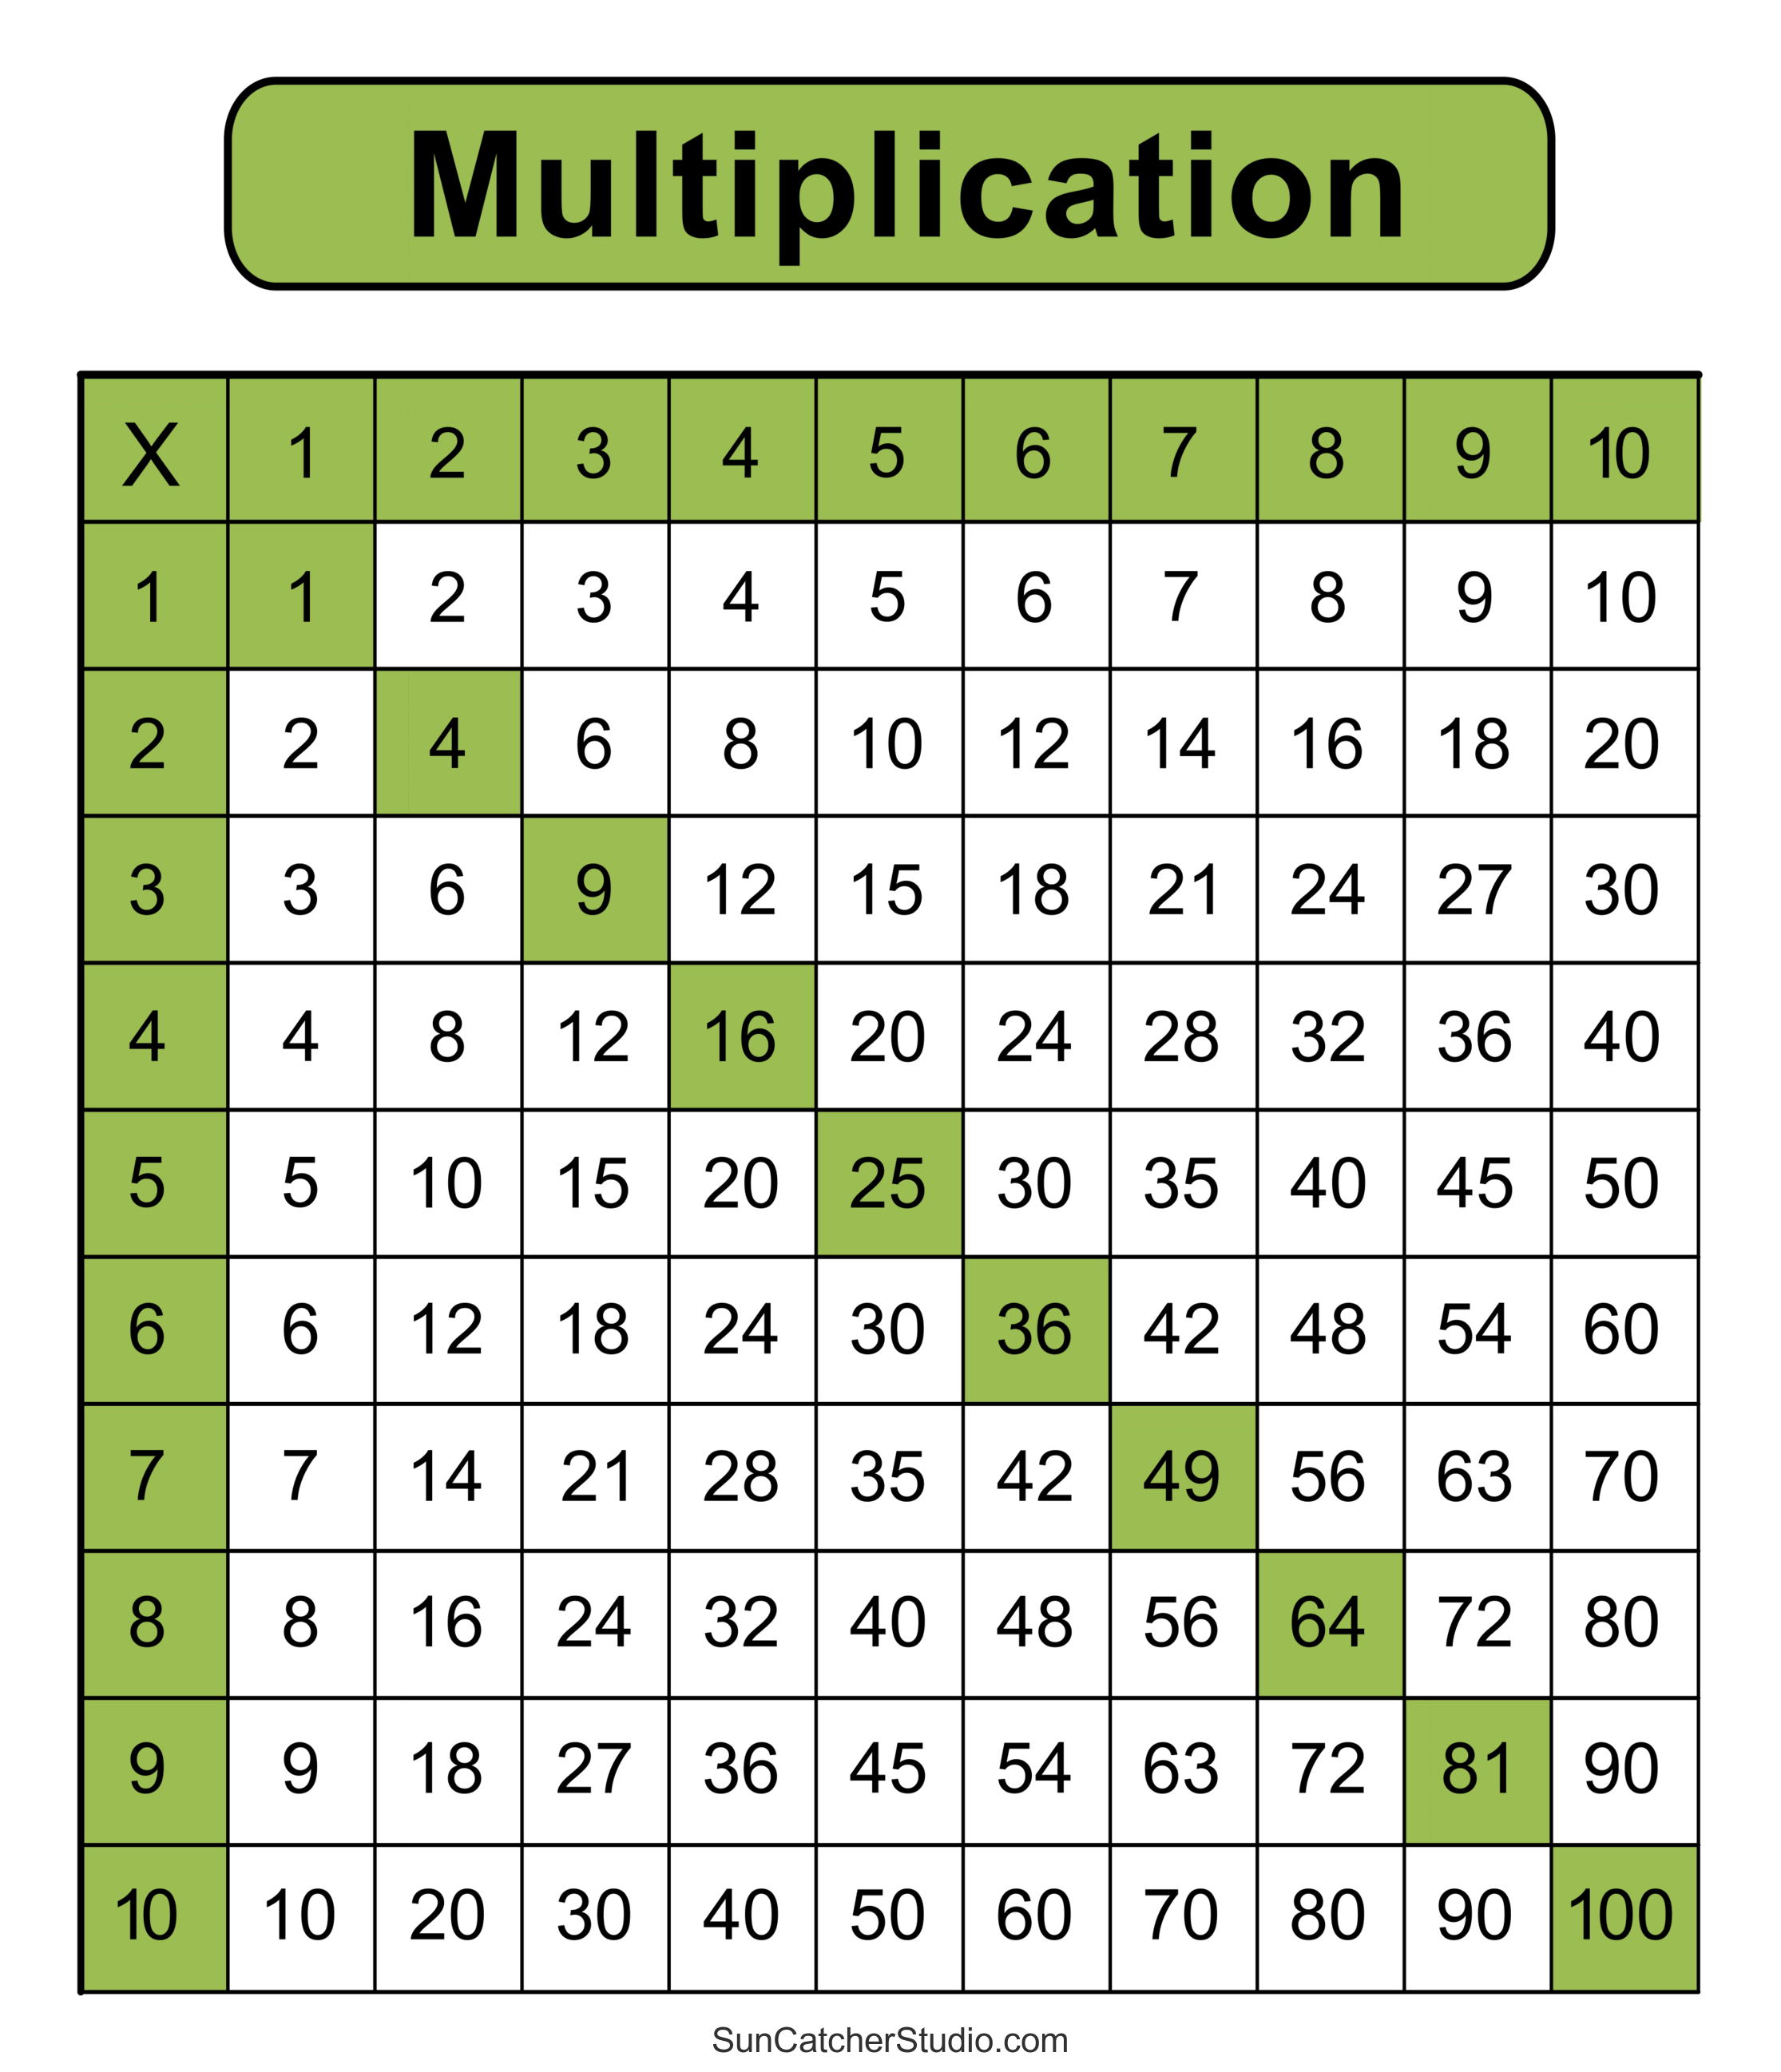 Multiplication Charts (PDF): Free Printable Times Tables DIY Projects